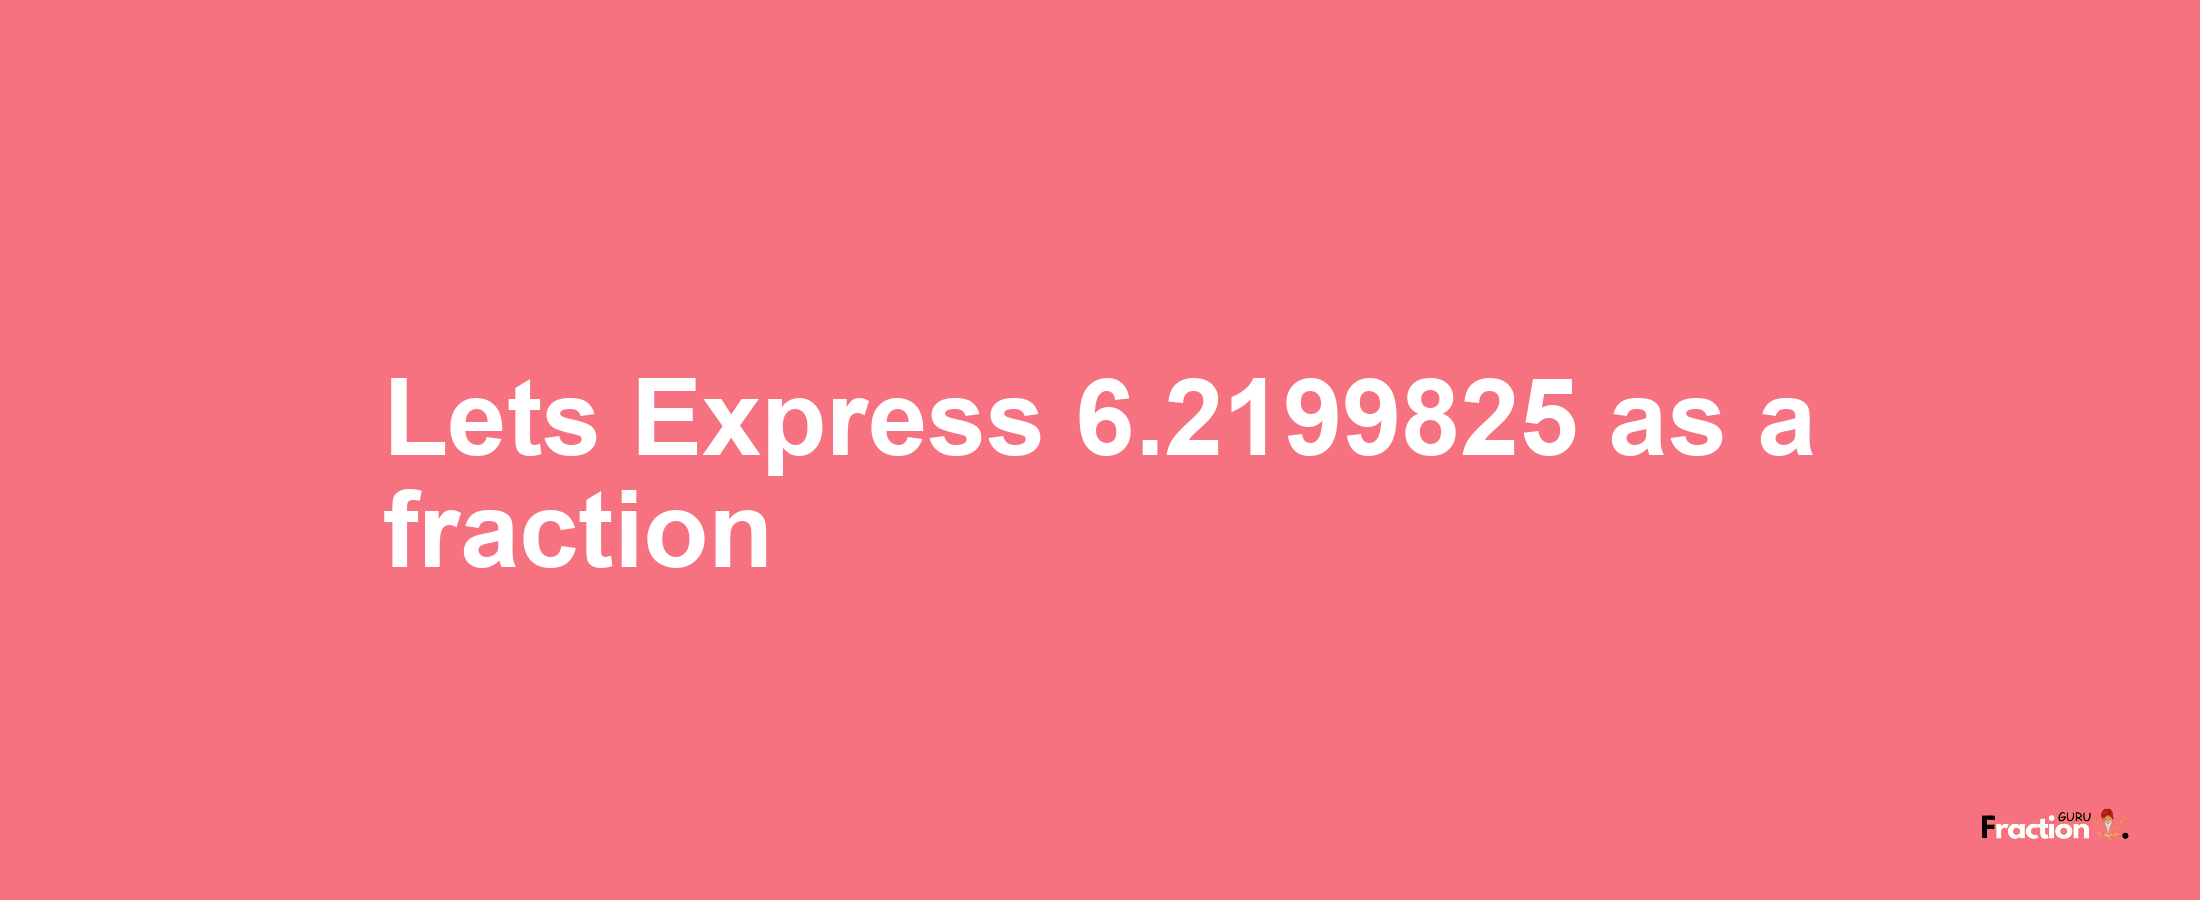 Lets Express 6.2199825 as afraction